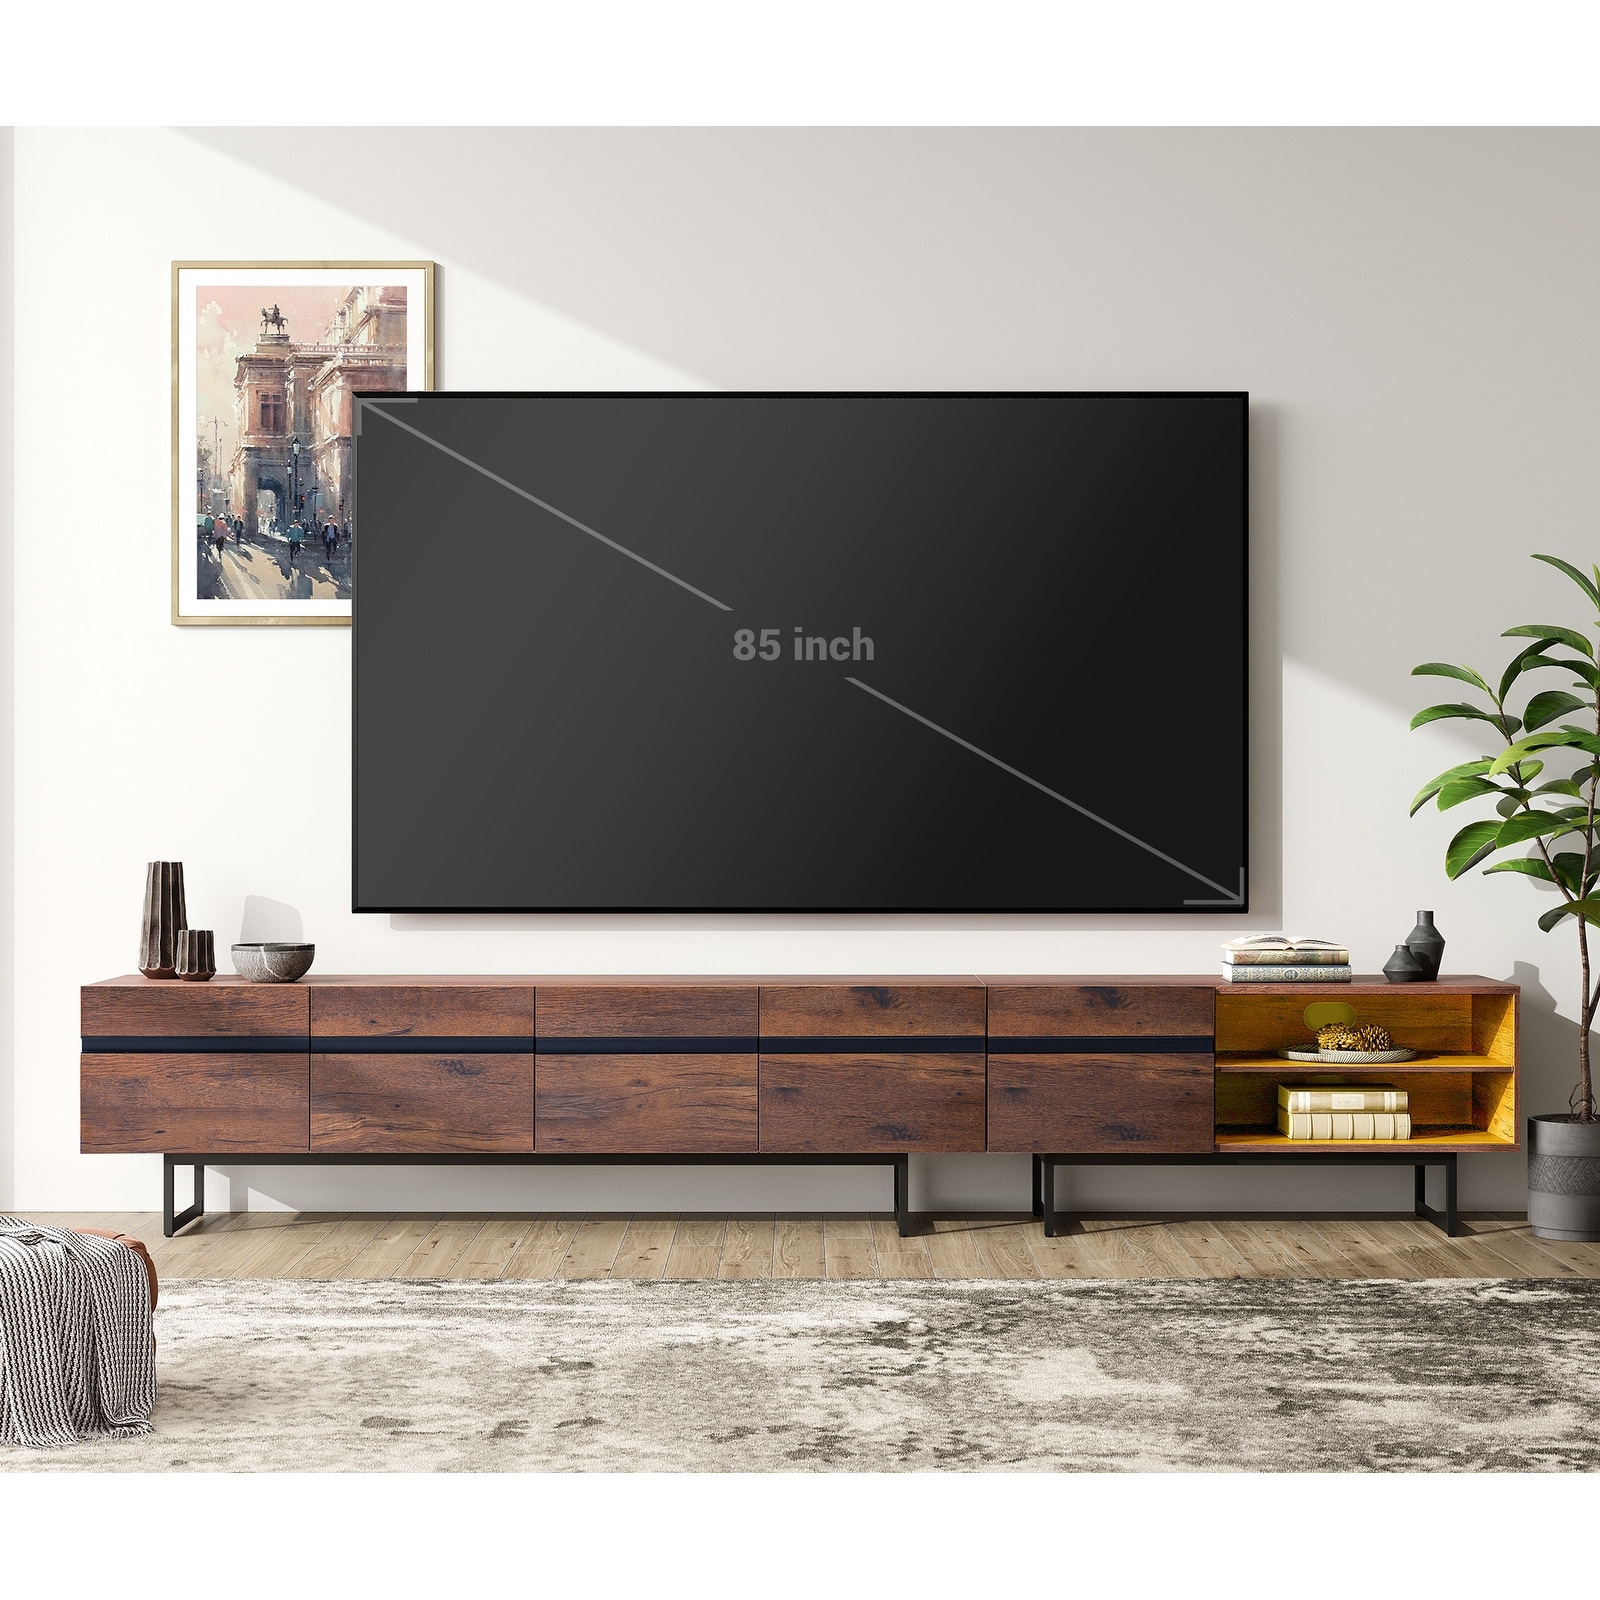 WAMPAT Modern TV Stand for up to 100 inch TV with Storage Cabinets